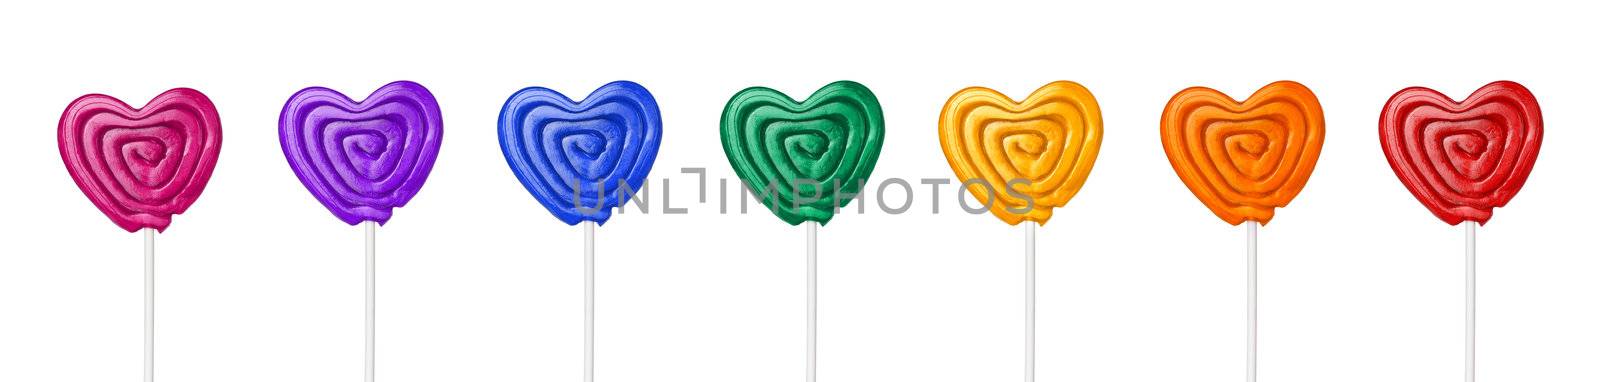  colorful heart shape lollipop on white background by ozaiachin